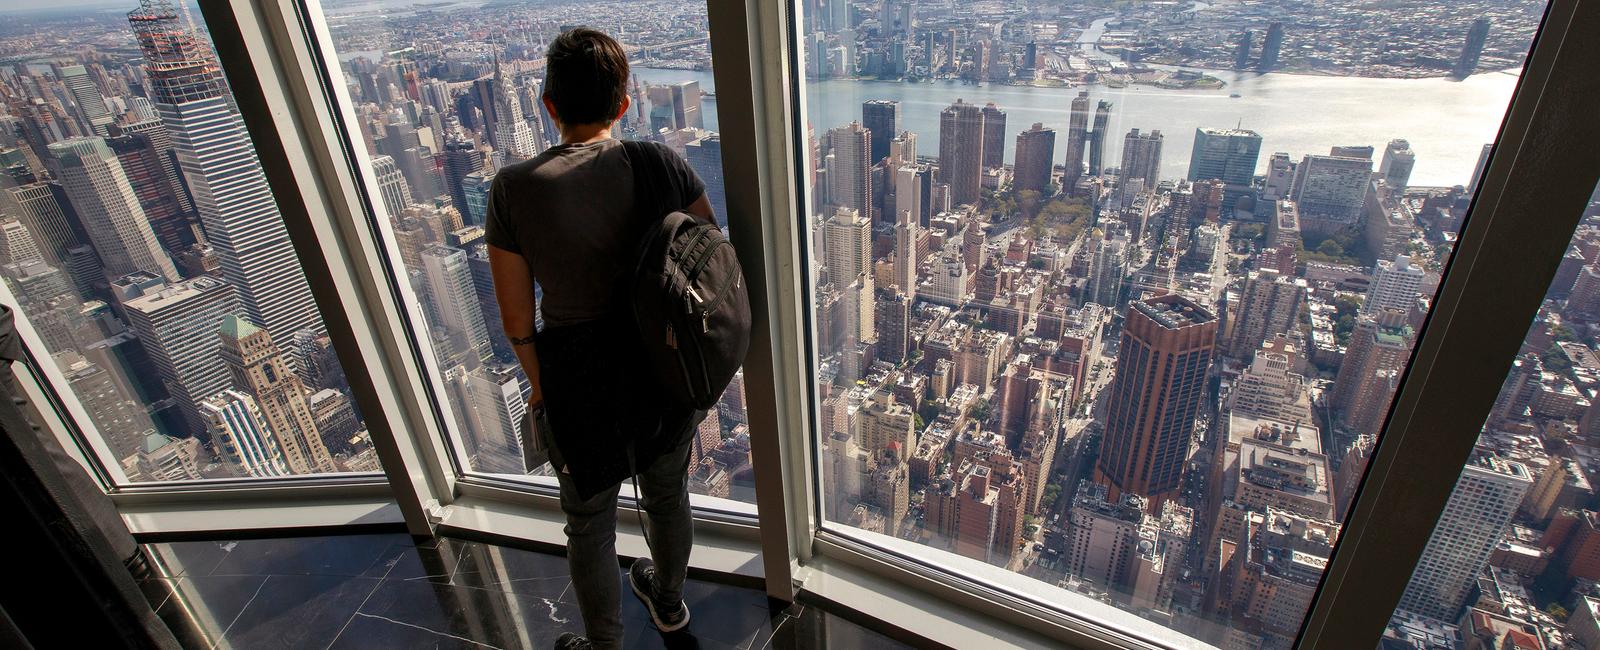 There are 1 575 steps from the ground floor to the top of the empire state building